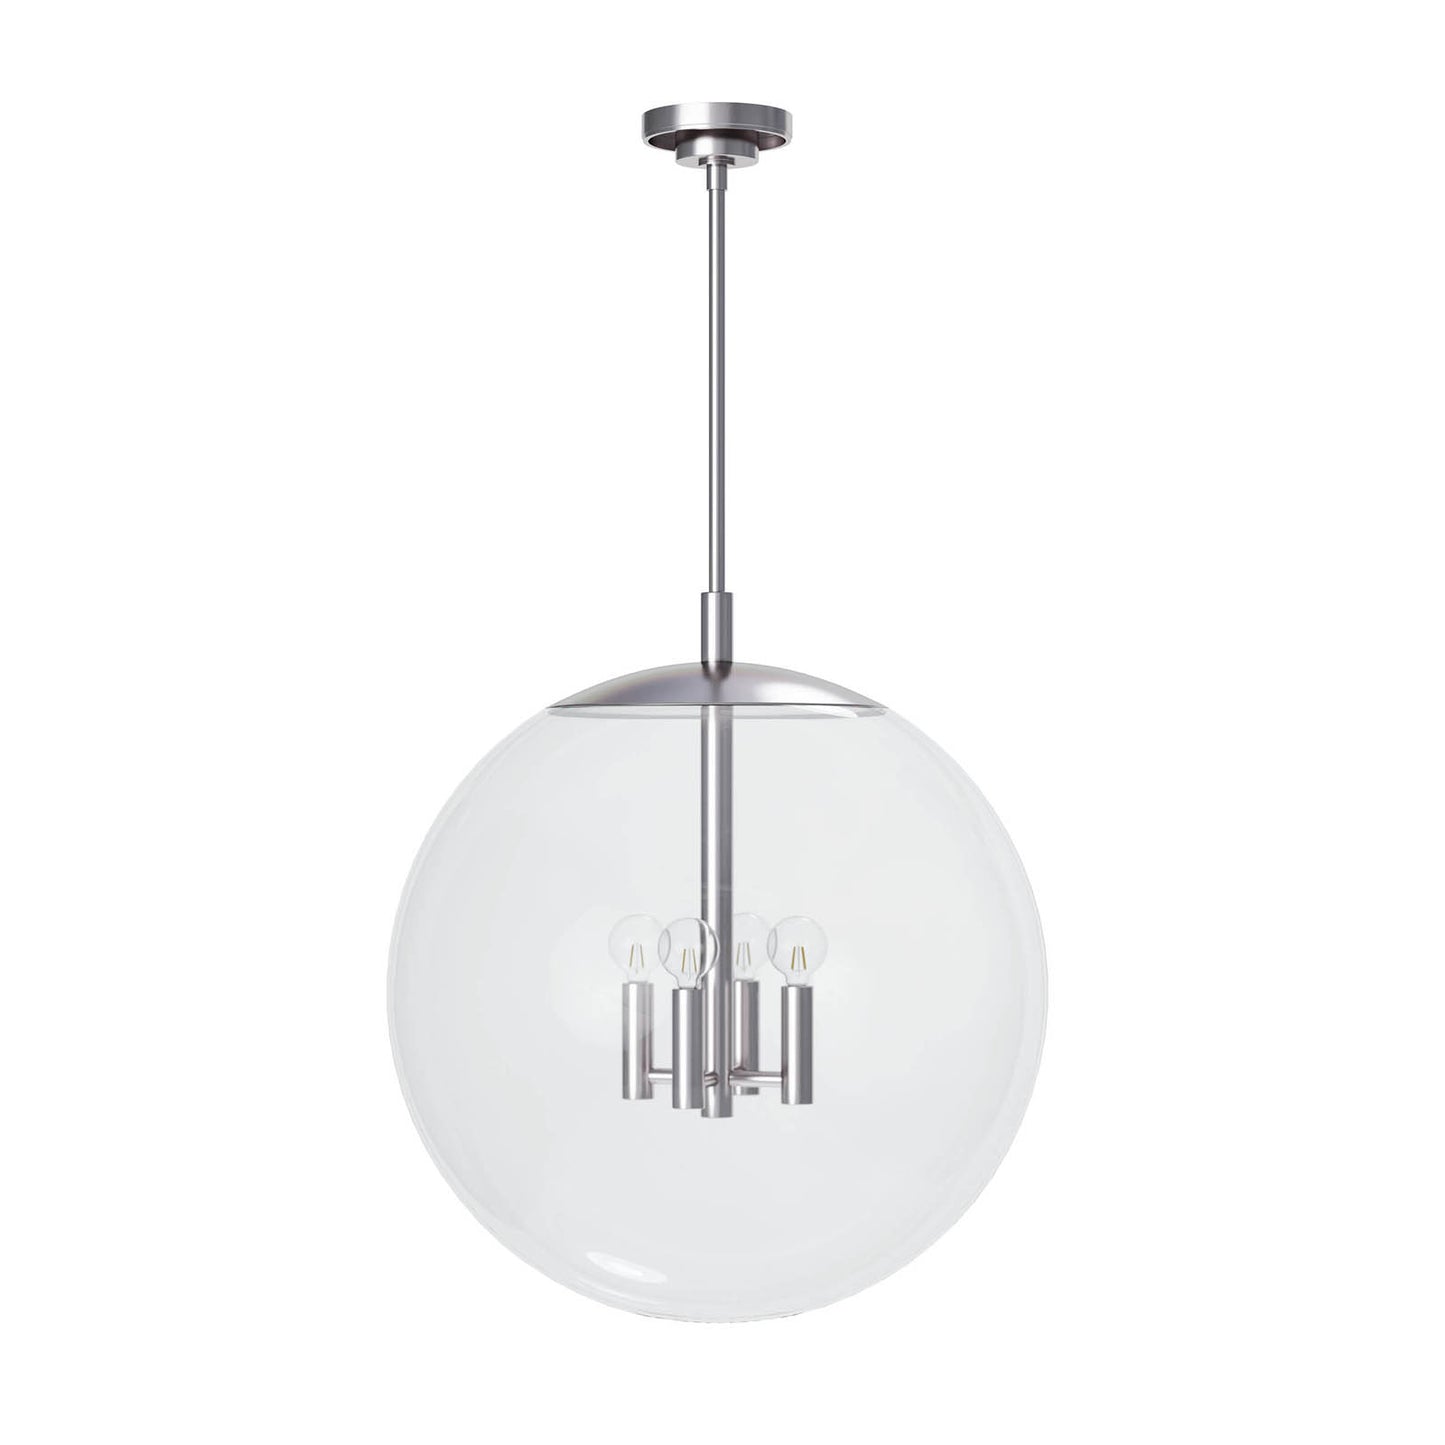 Cafe Pendant Large in Polished Nickel by Coastal Living